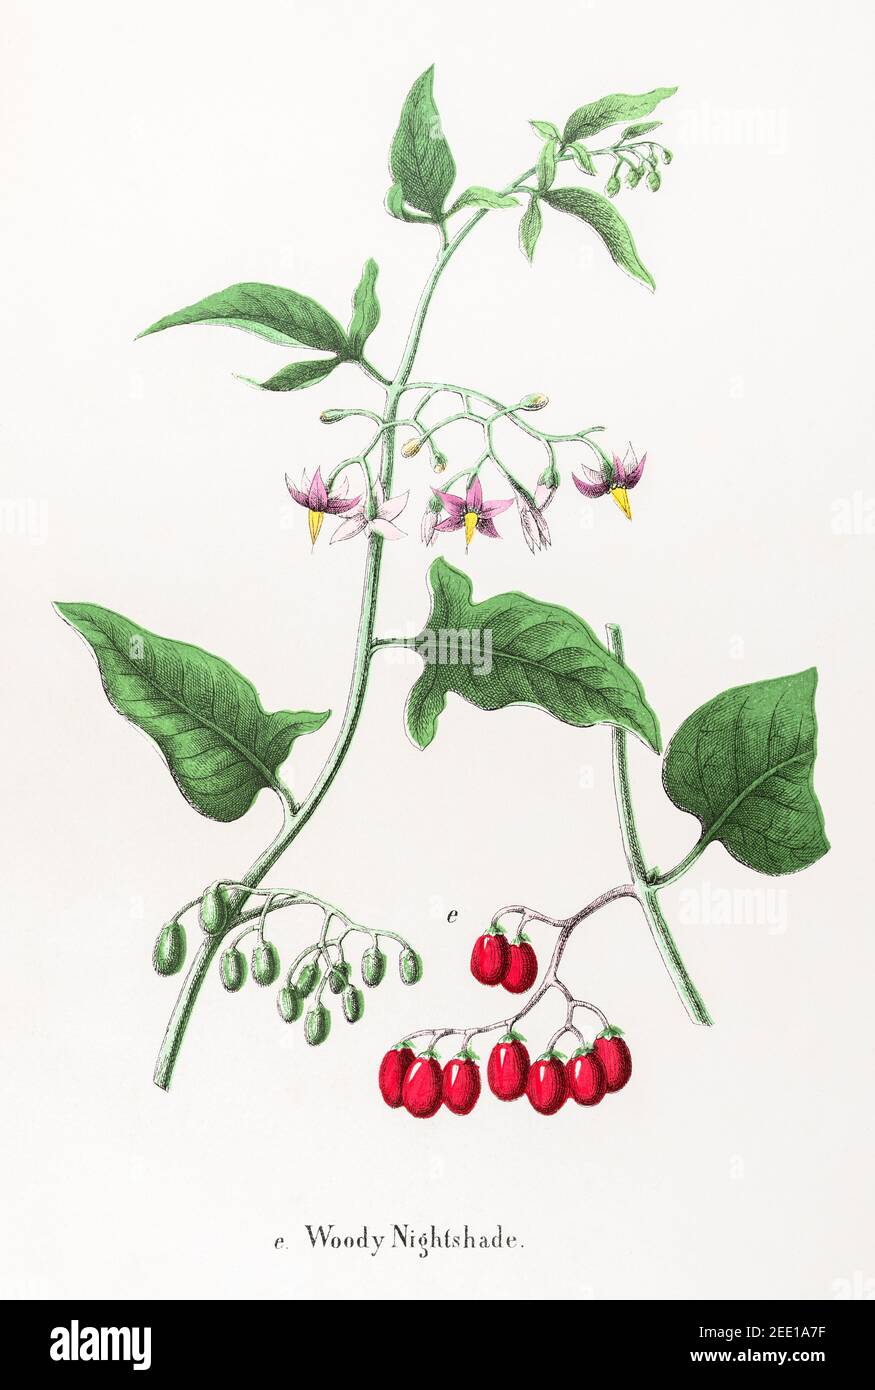 Digitally restored 19th century Victorian botanical illustration of Woody Nightshade, Bittersweet. See notes for source and process info. Stock Photo